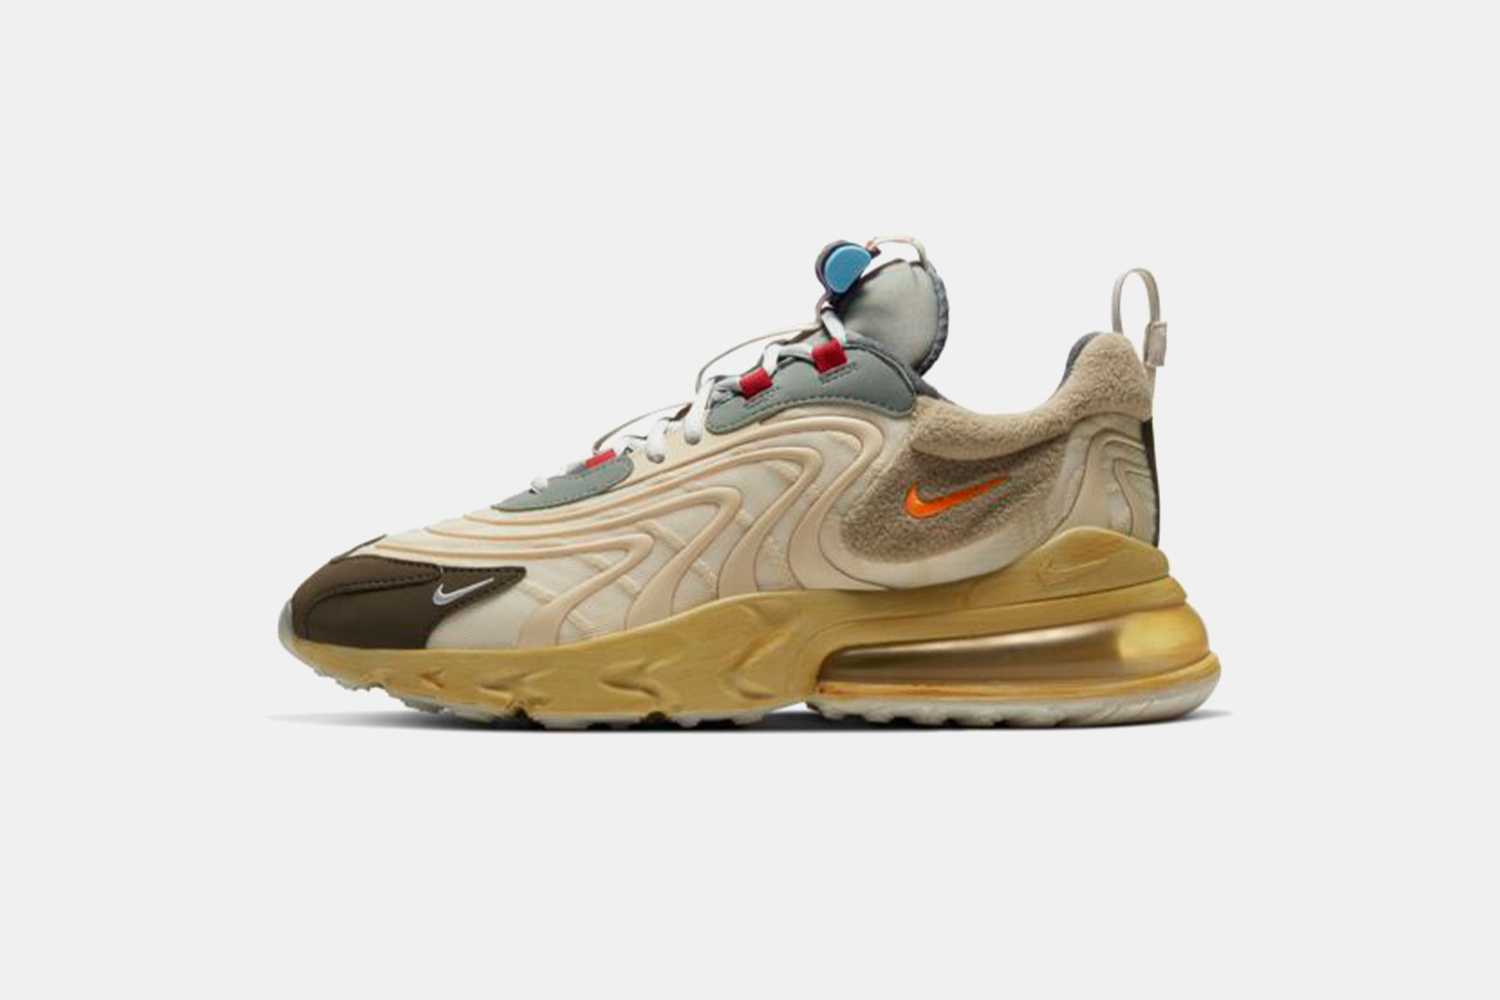 These Travis Scott x Nike Sneakers Are 